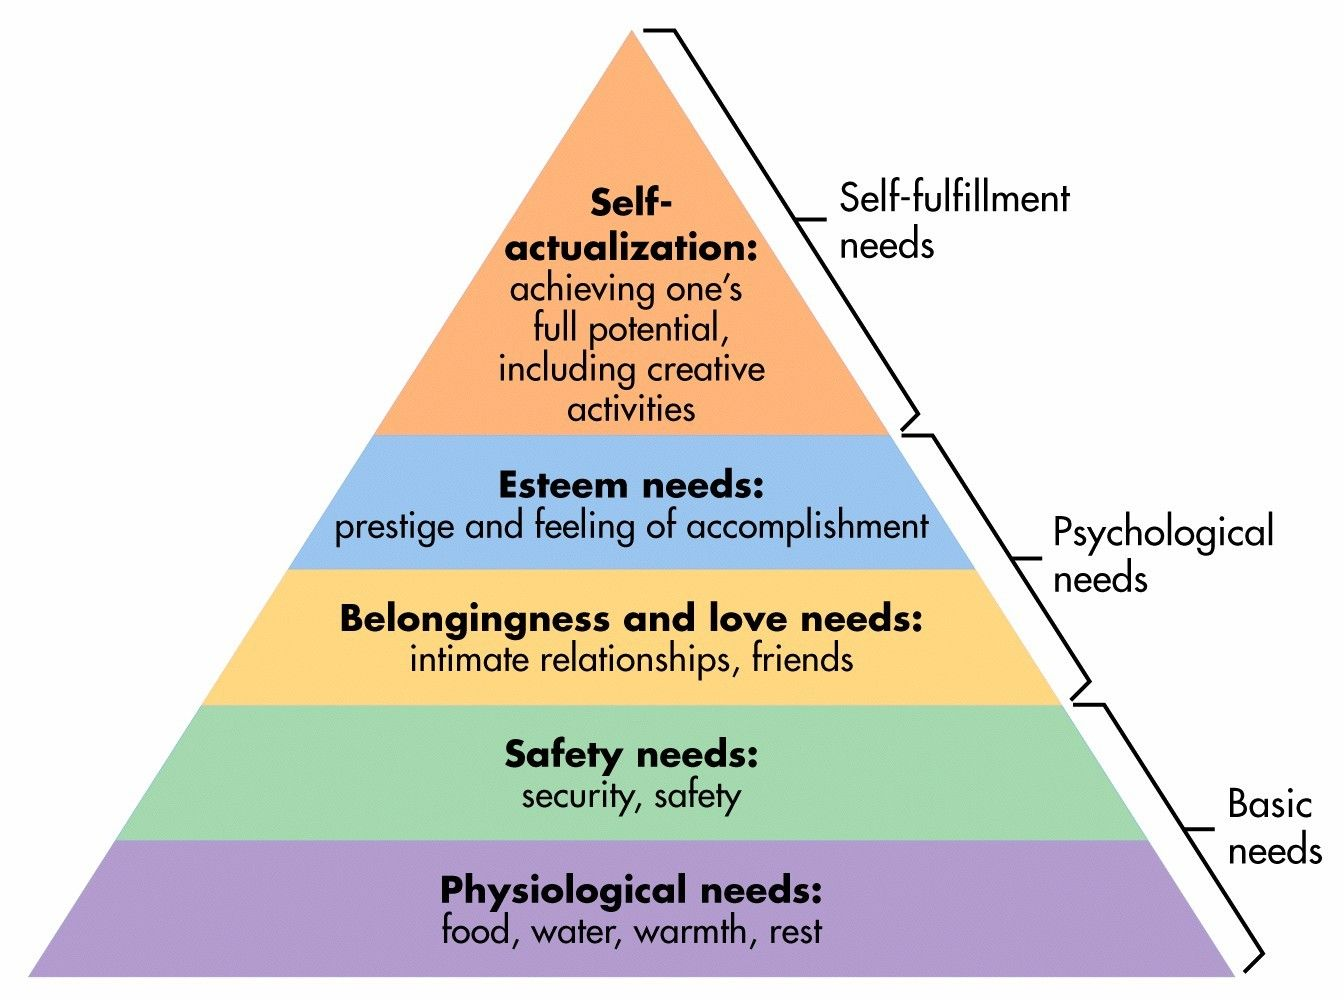 A rainbow pyramid divided into Maslow’s hierarchy of needs, with basic survival needs at the base, and self-actualisation at the tip.